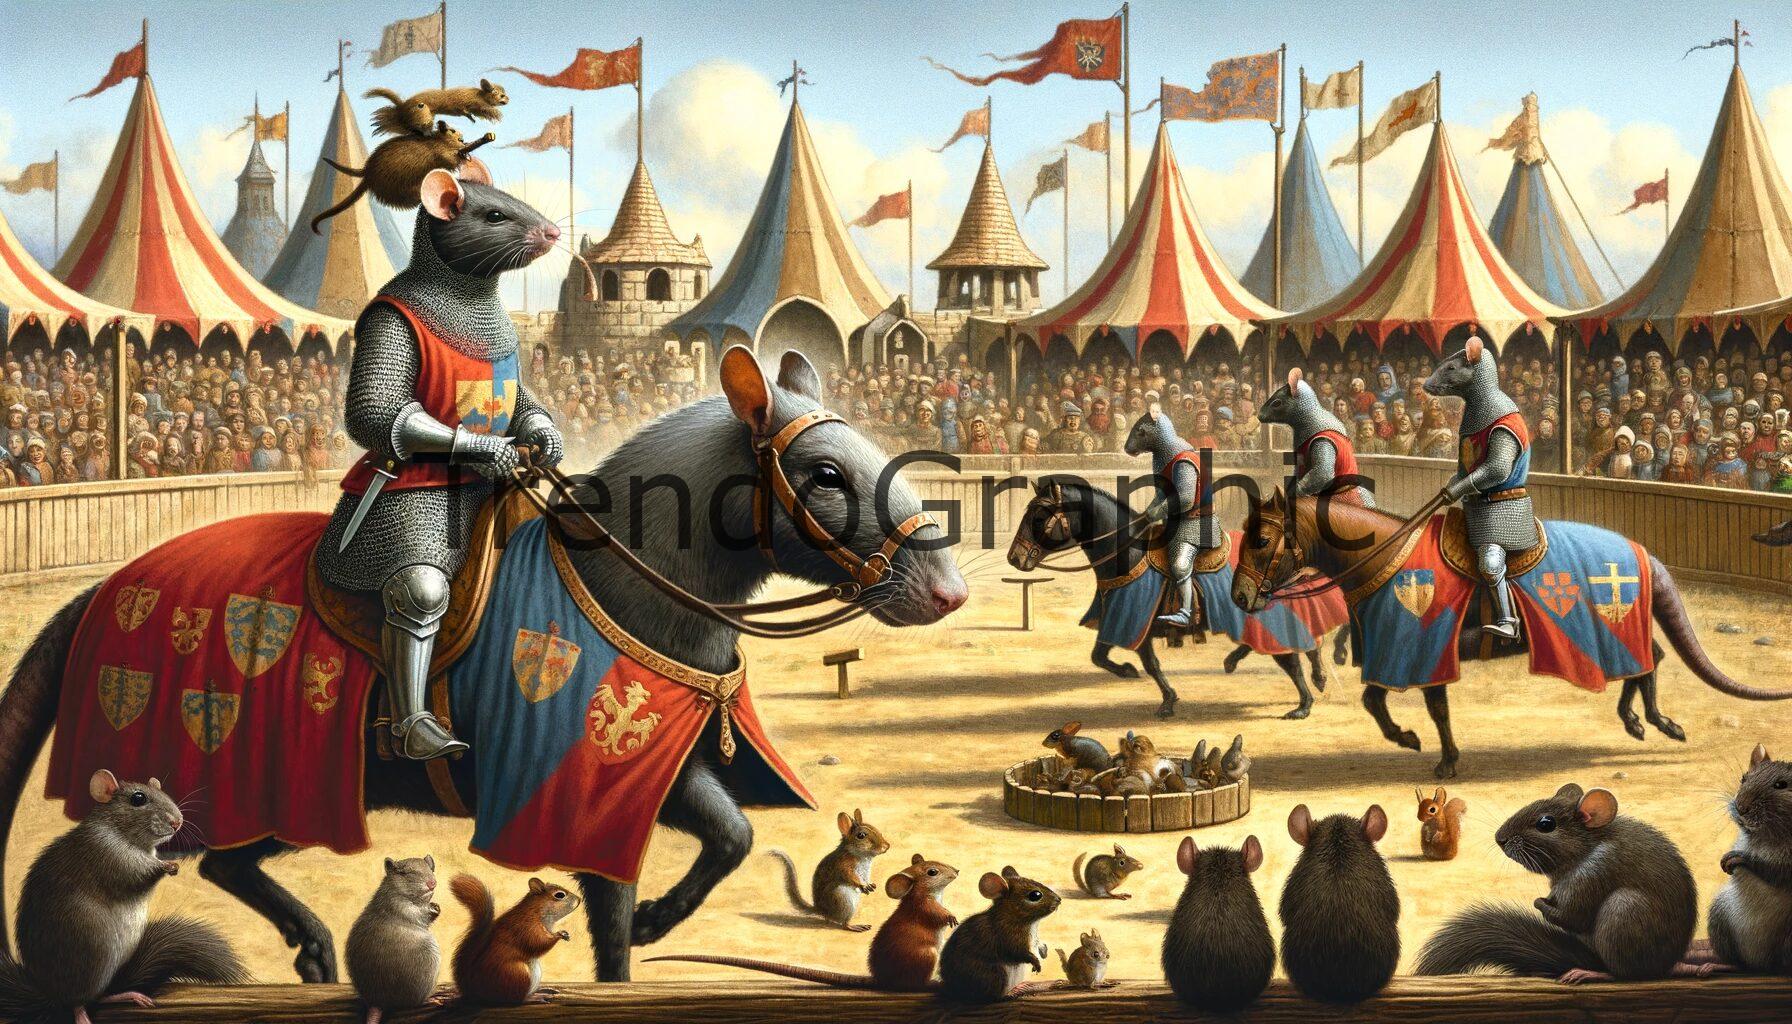 Rats as Medieval Jousting Knights: A Whimsical Reimagining